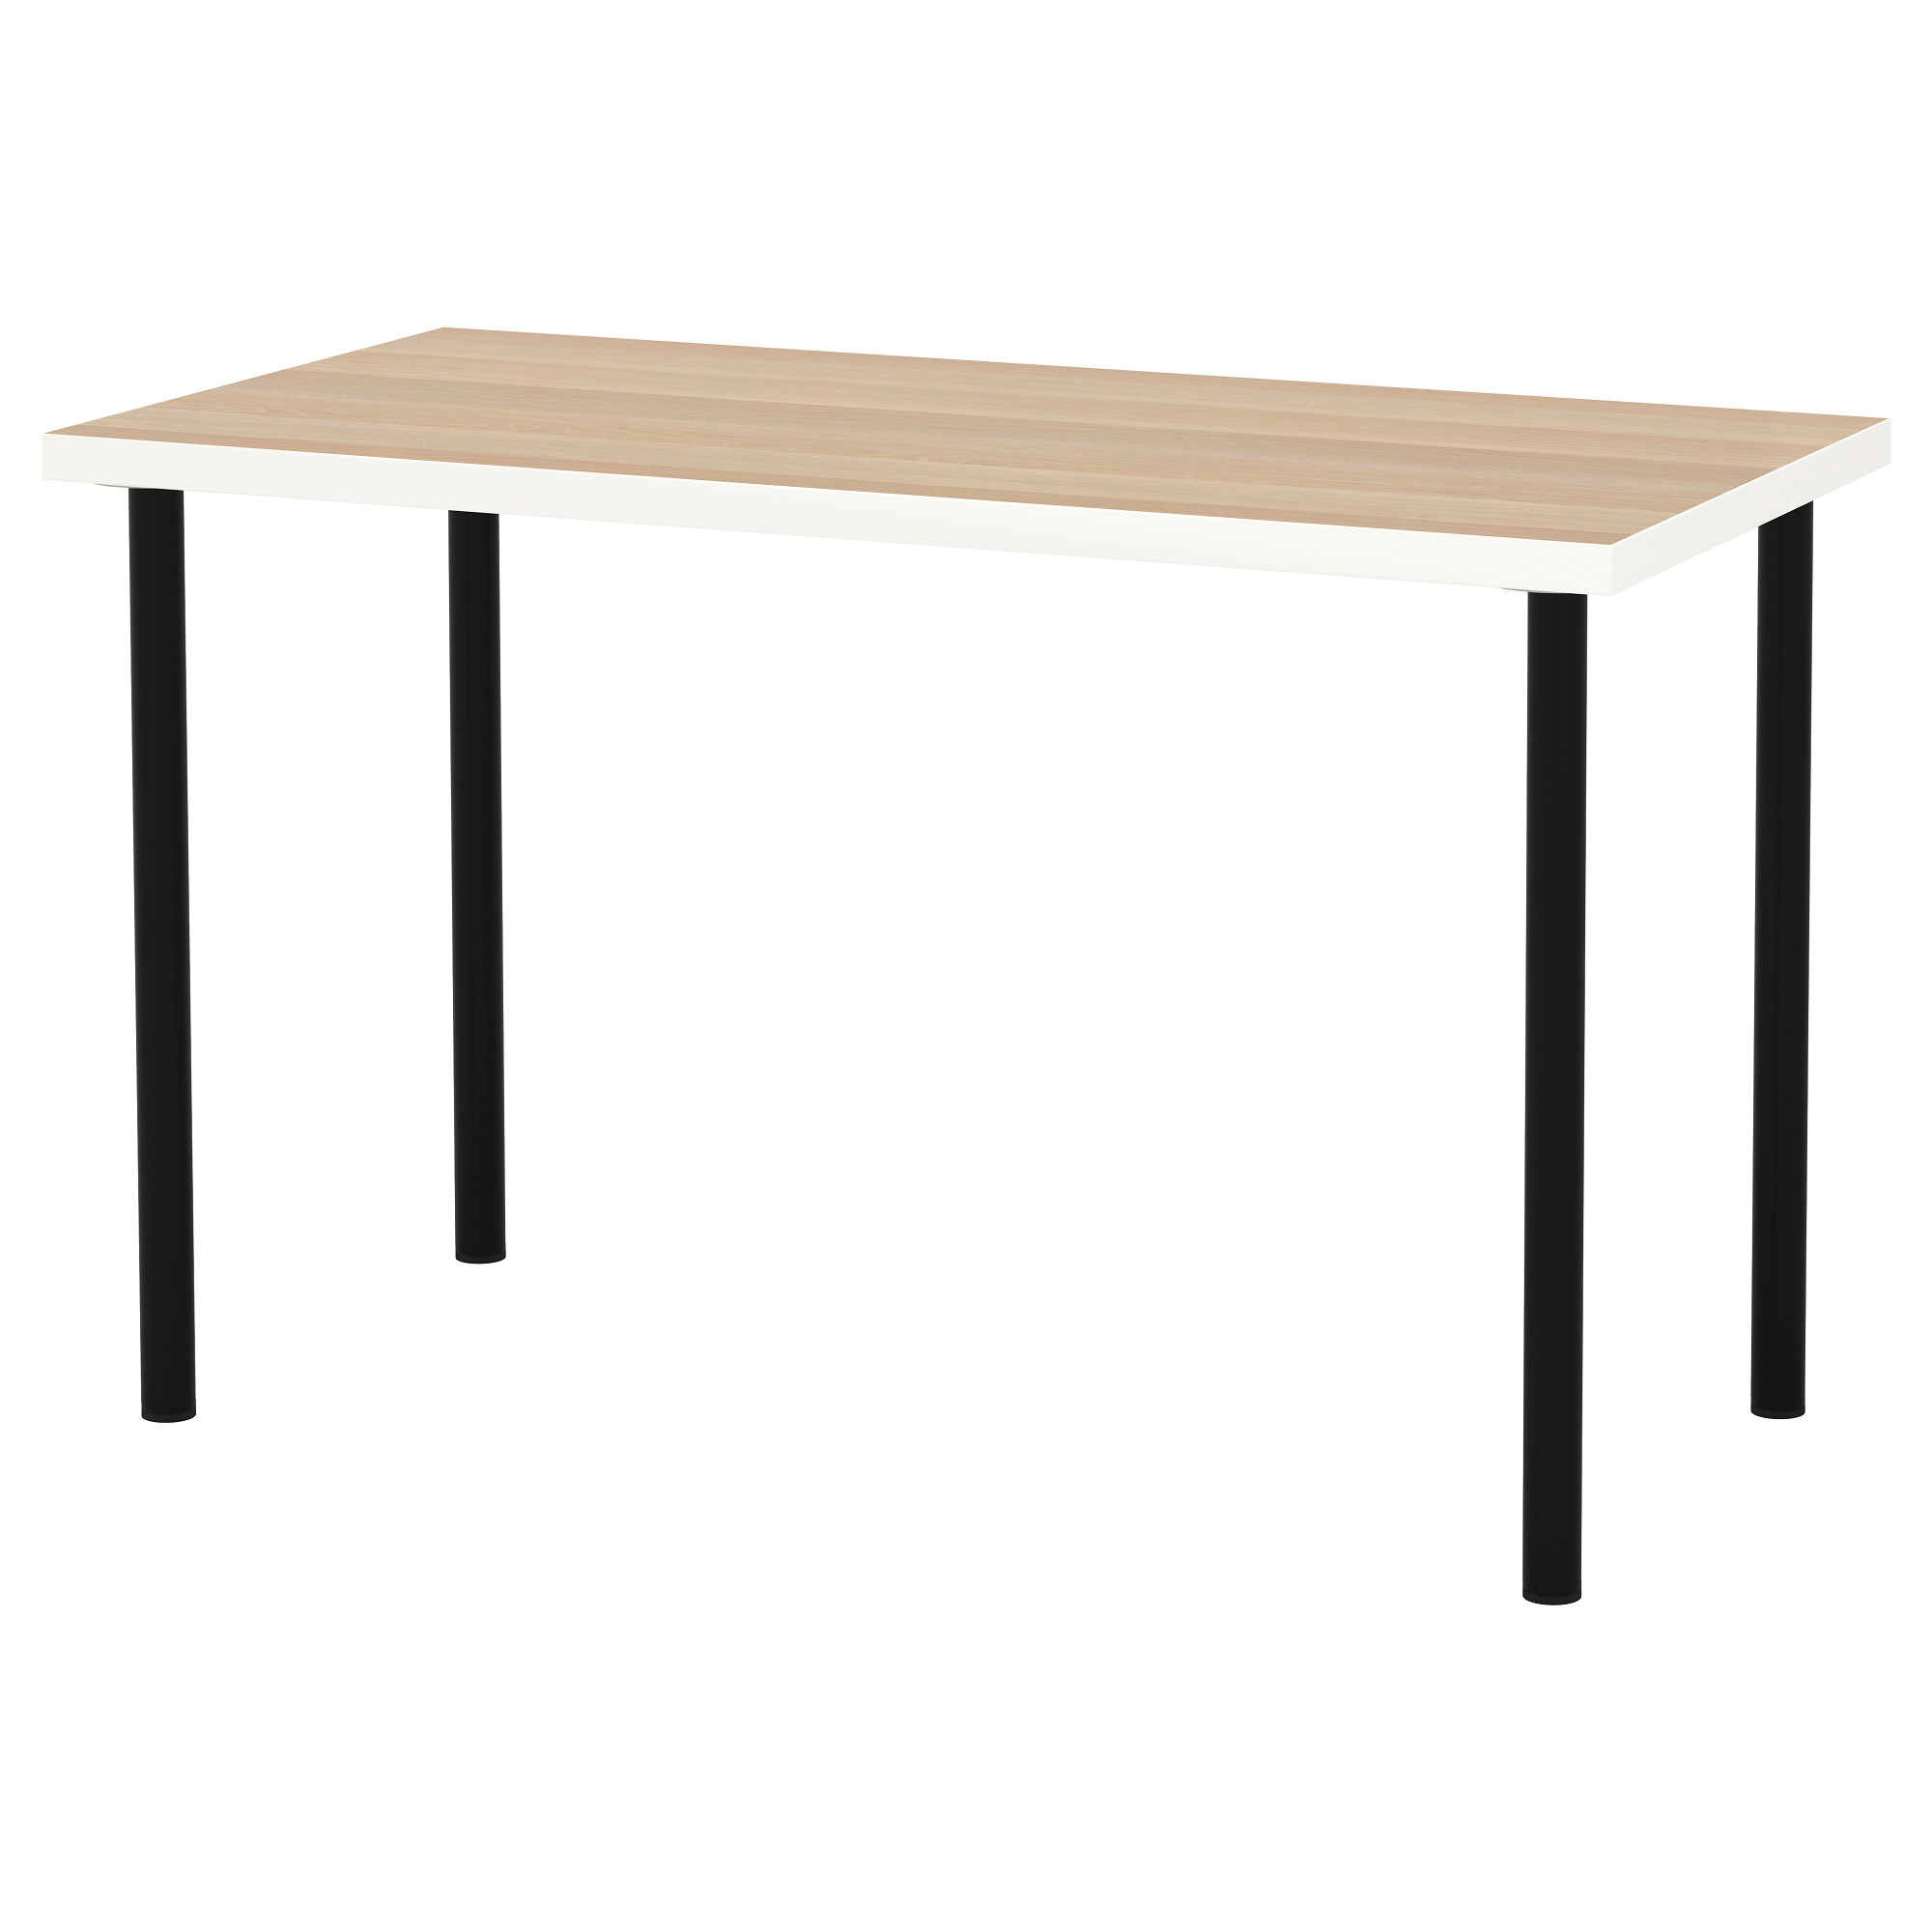 ADILS LINNMON table  white white stained oak effect 